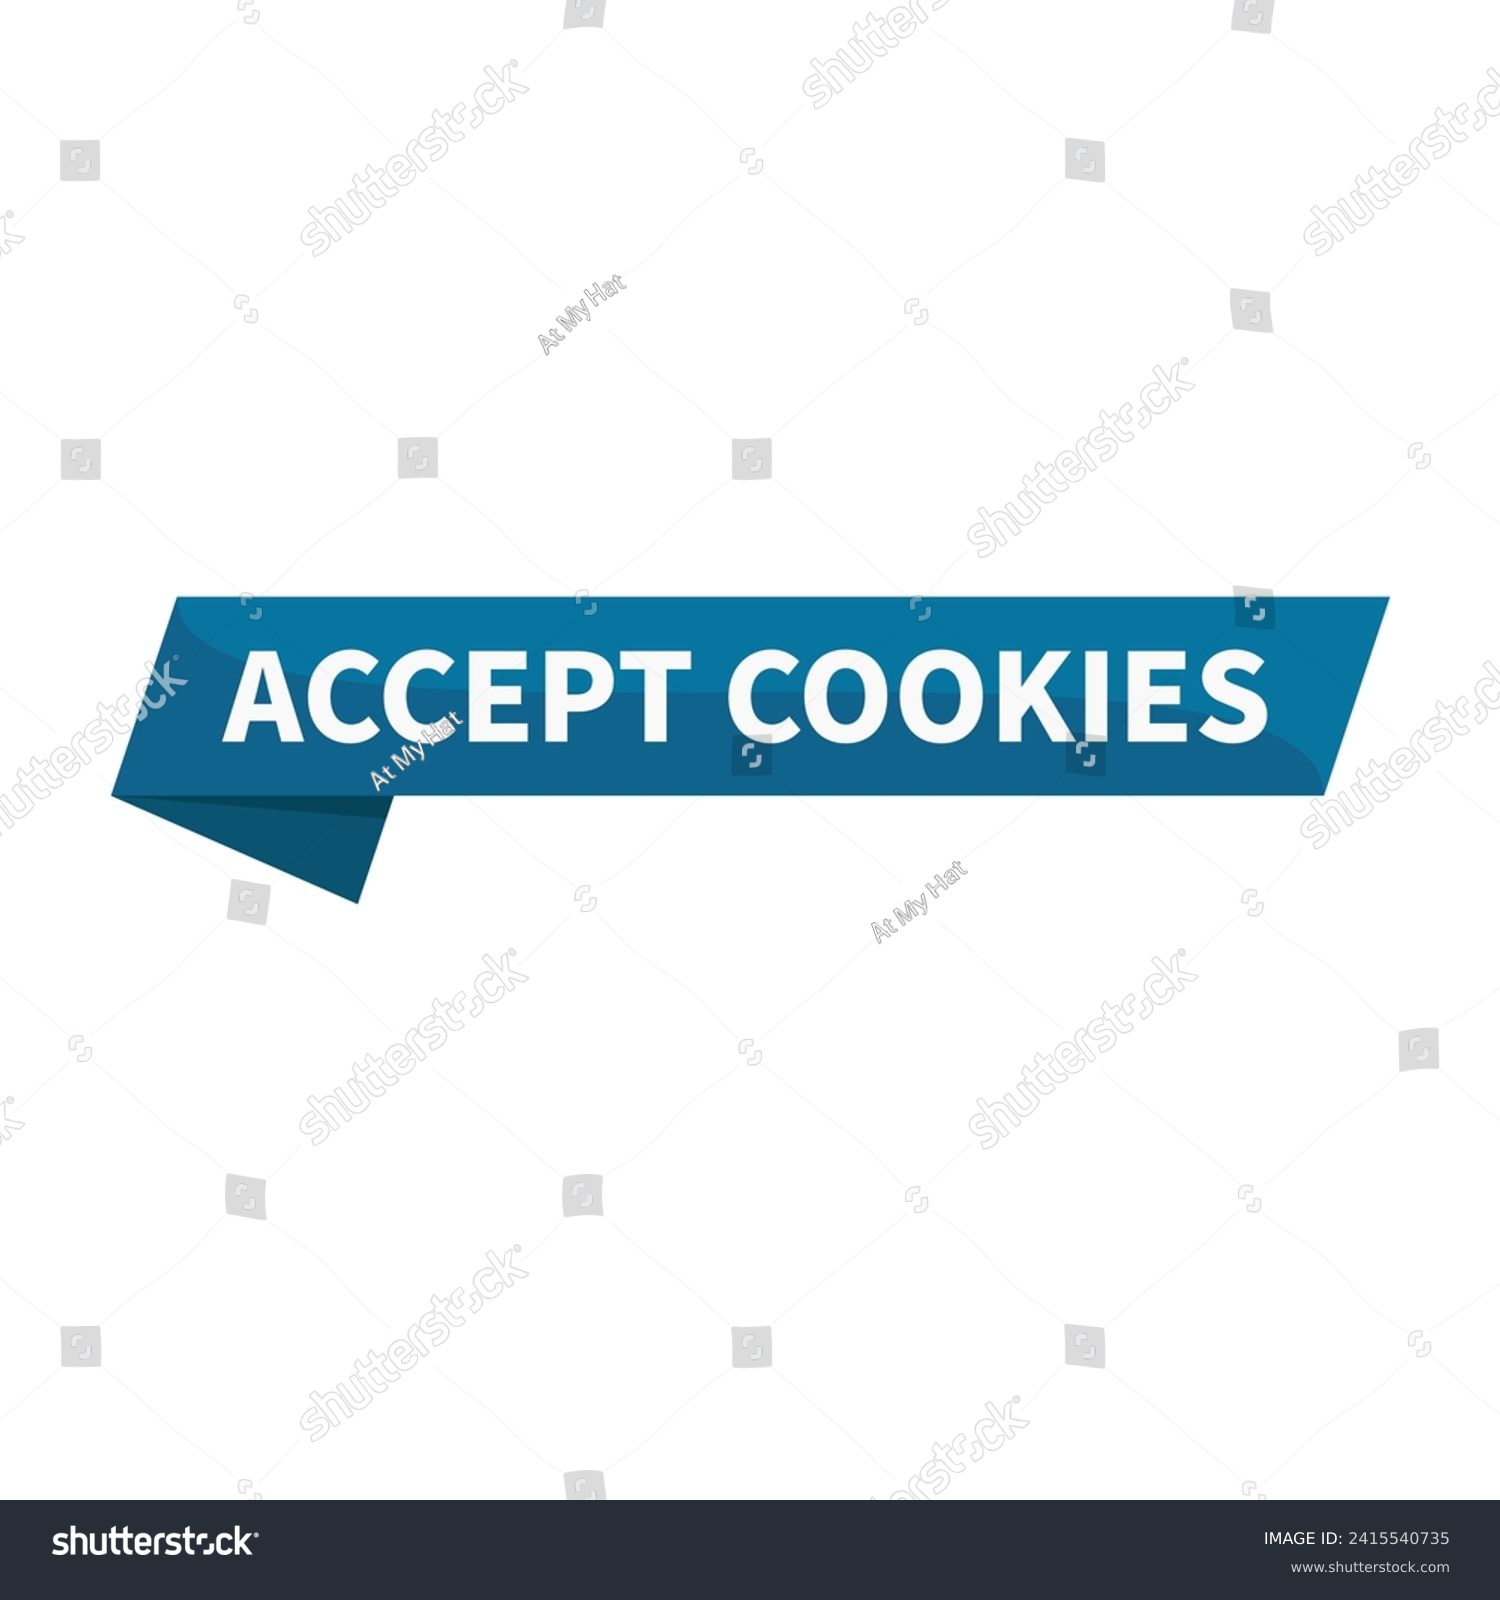 SVG of Accept Cookies Blue Ribbon Rectangle Shape For Sign Information Website Security
 svg